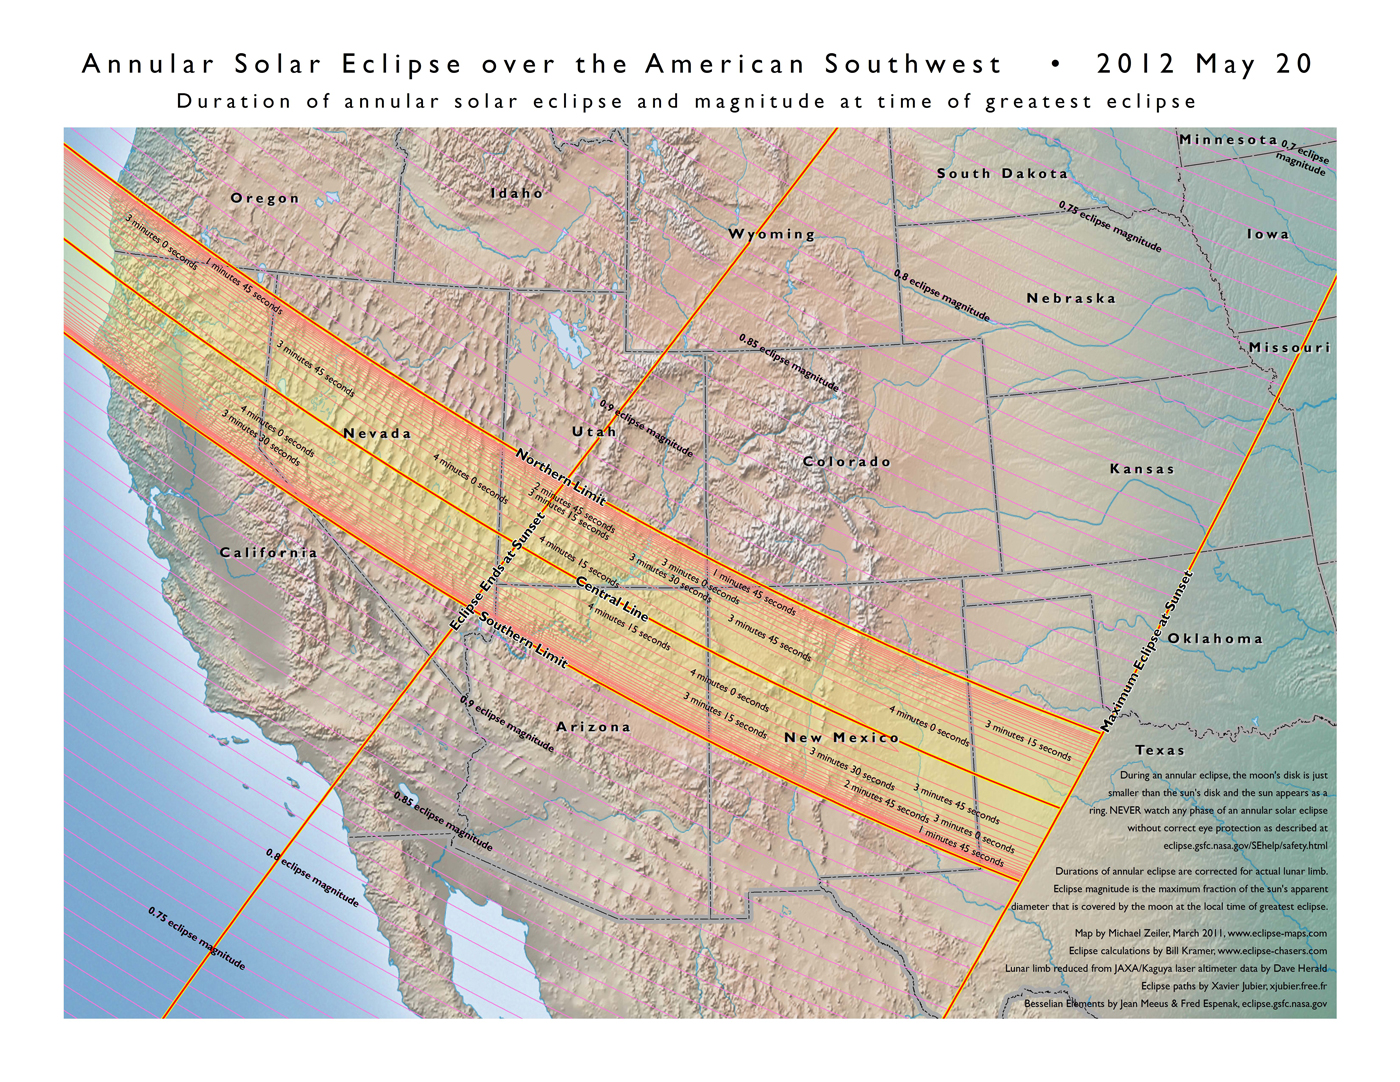 Map showing the path of the eclipse across the United States from the